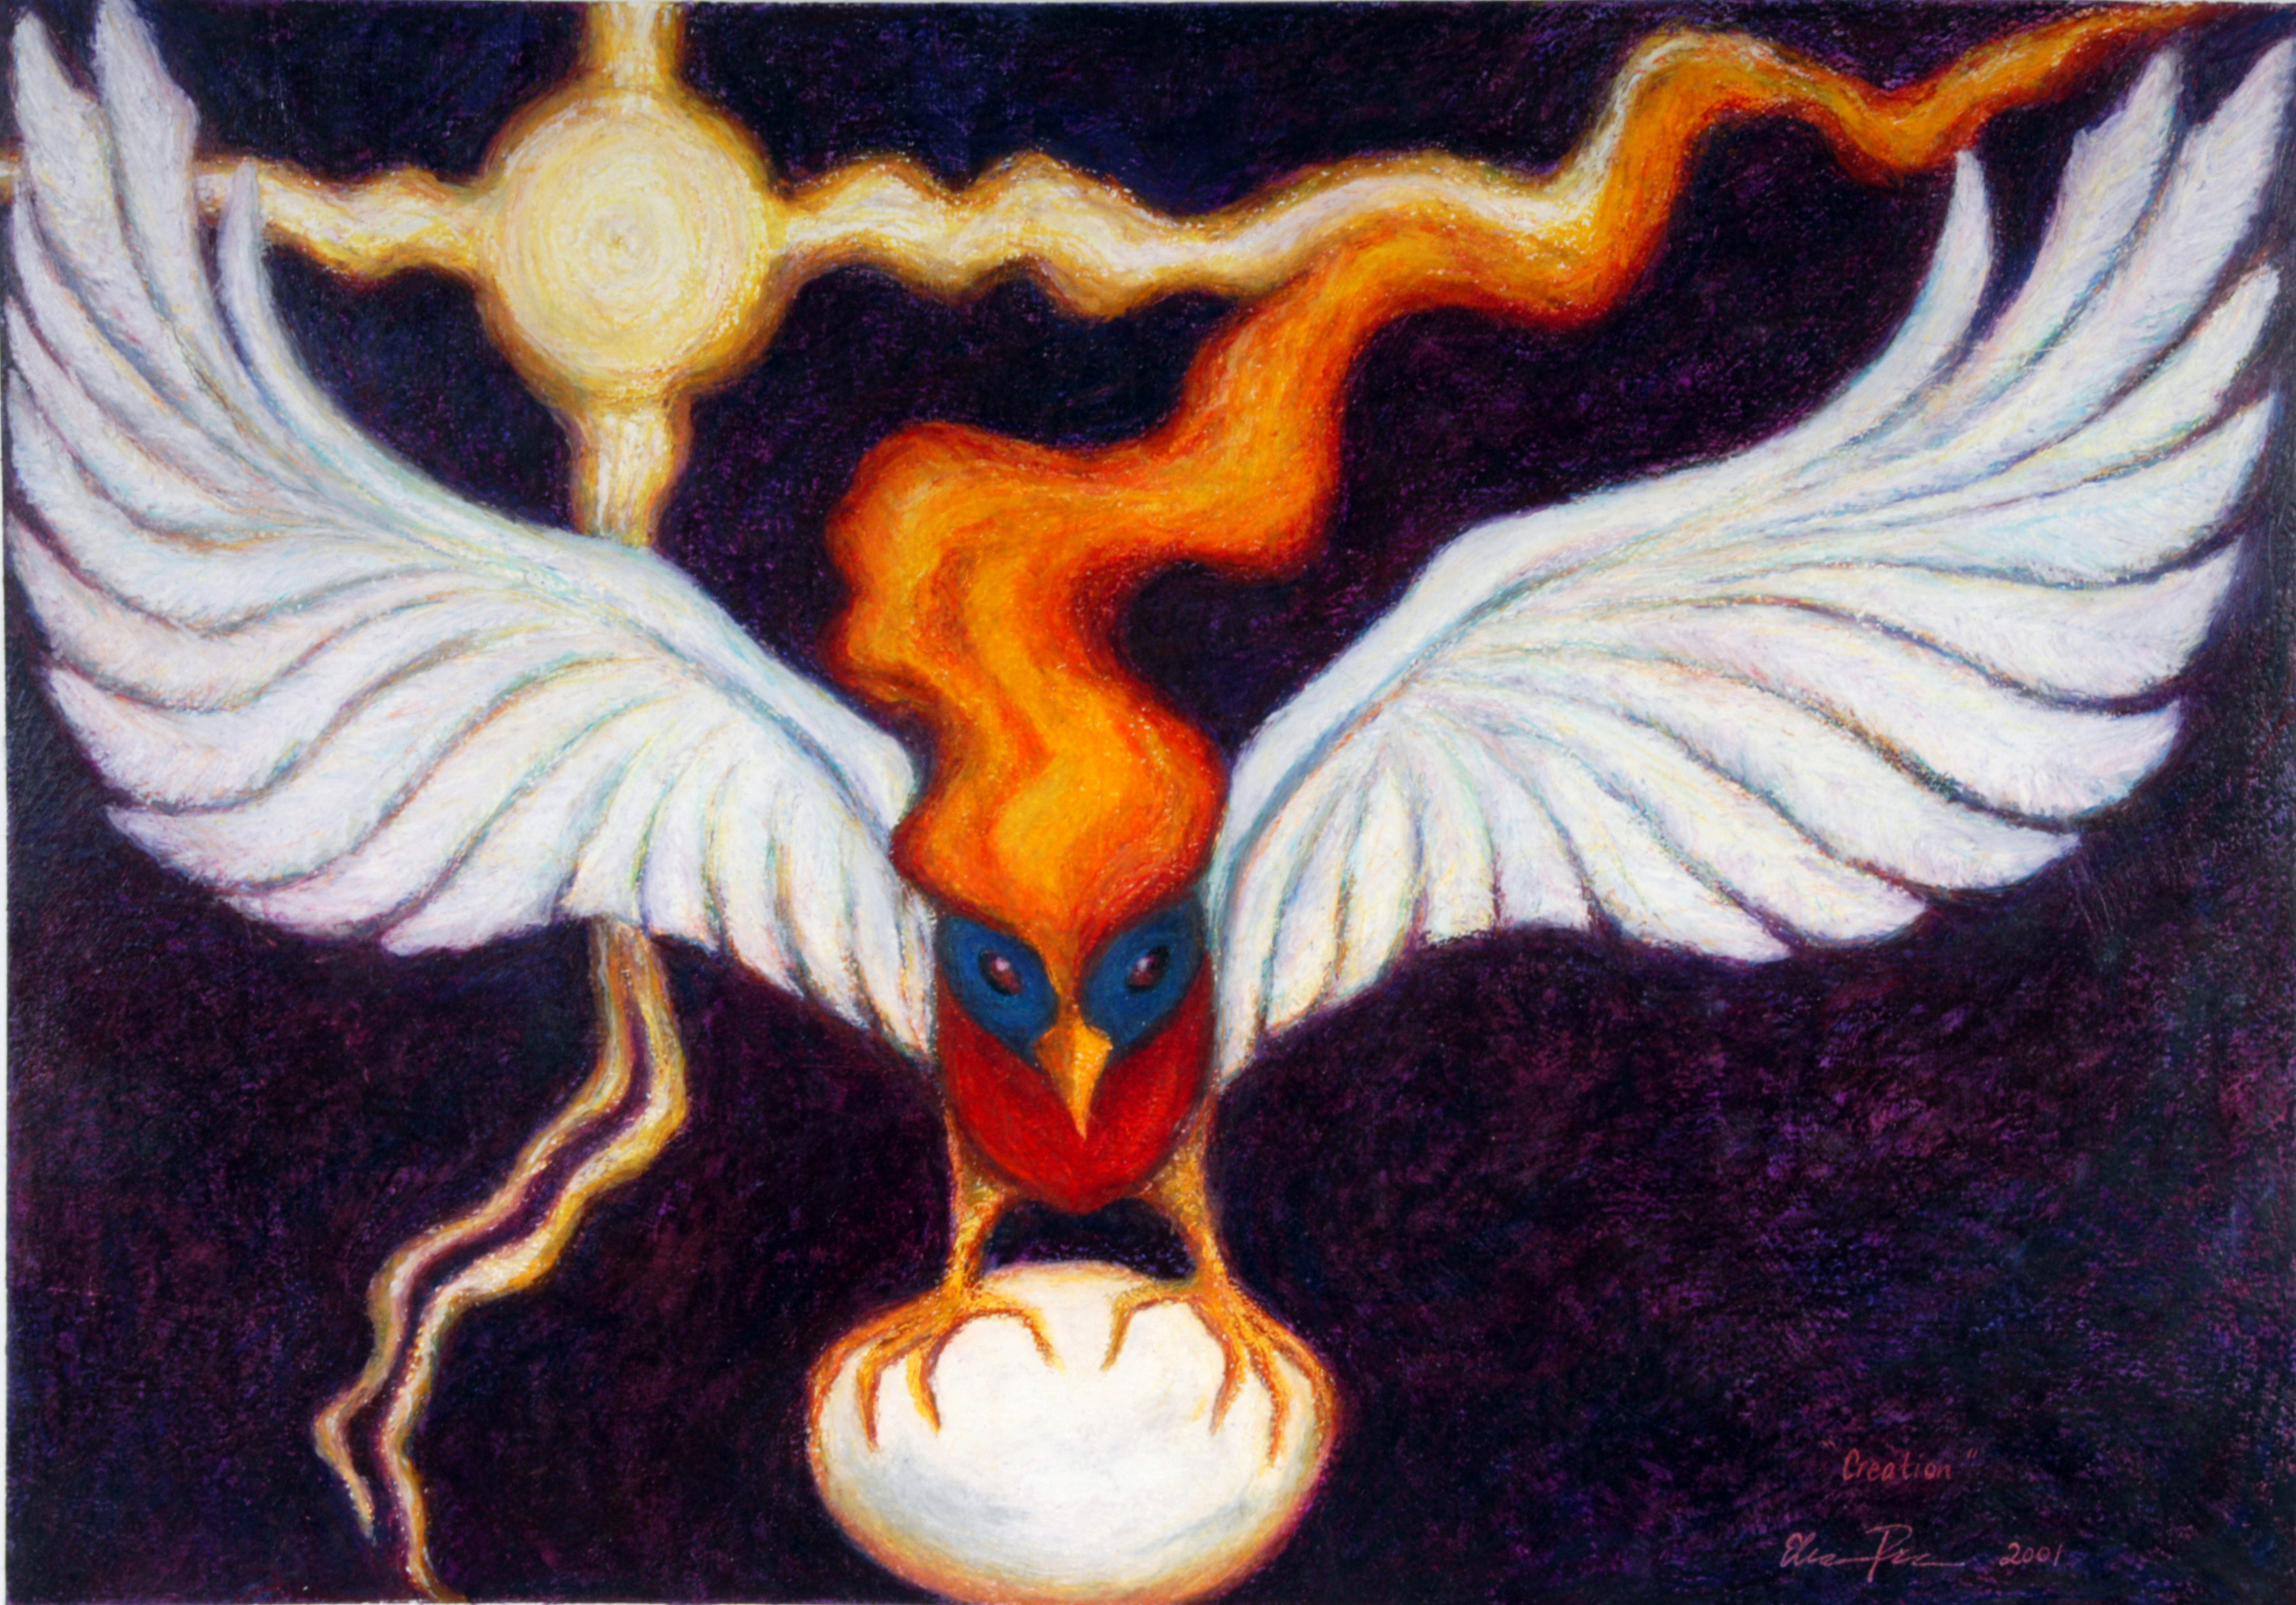 Creation, 2001
Oil pastel on gessoed watercolor paper
22”h x 30” w, Private Collection, Eleanor Ruckman